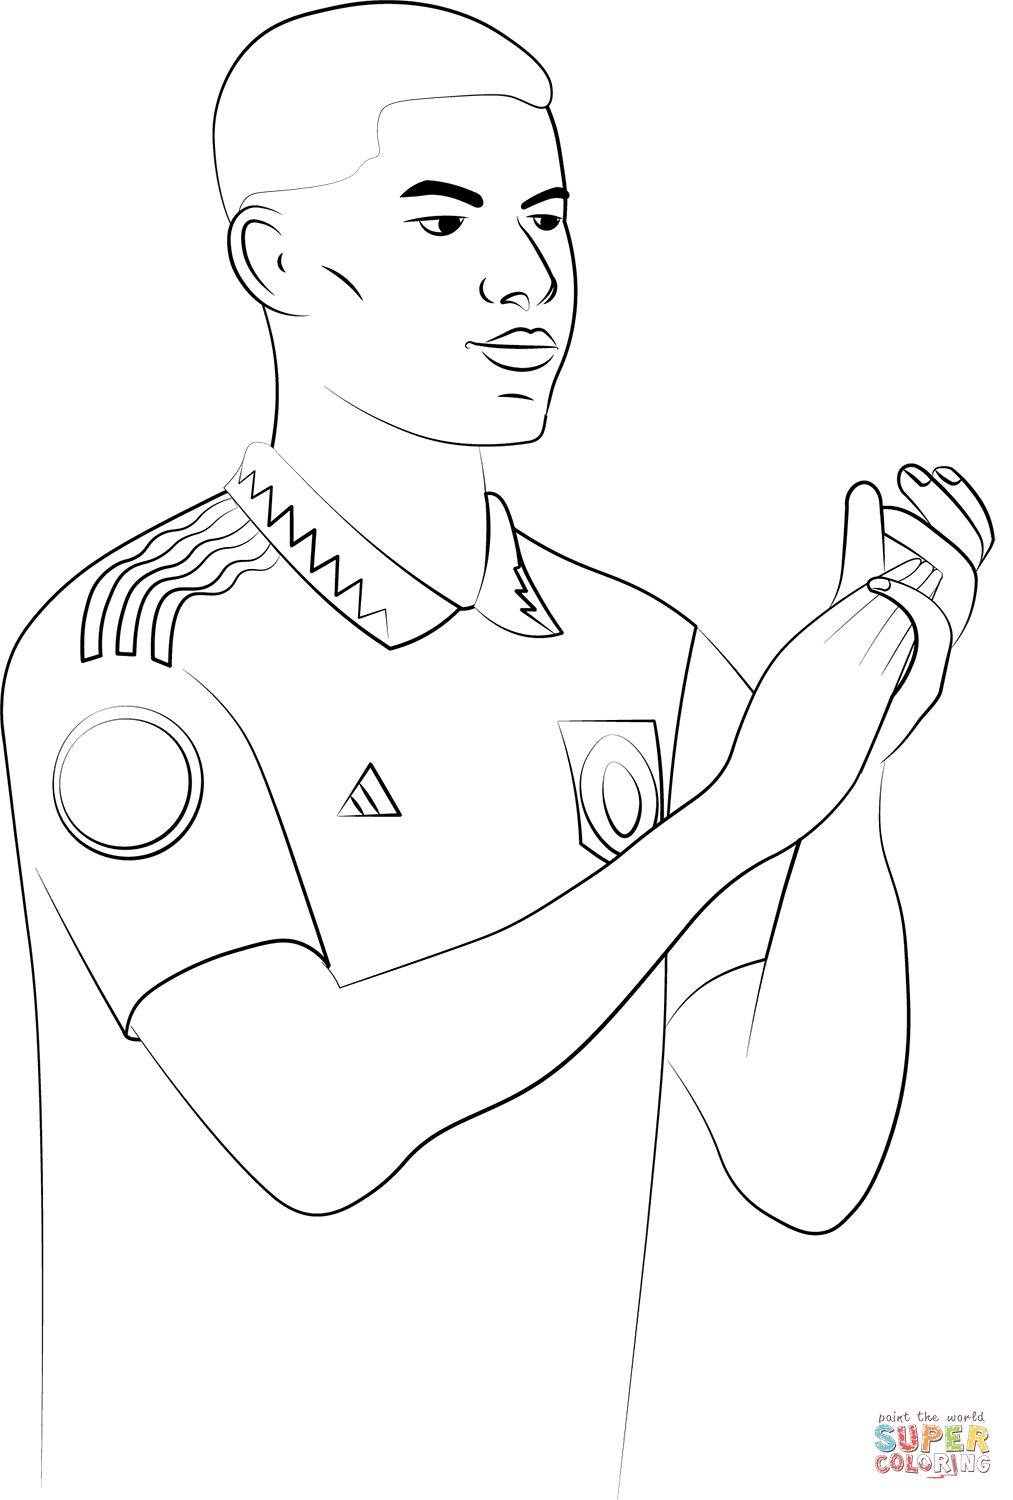 Marcus Rashford Coloring Page. Free - Coloring Home